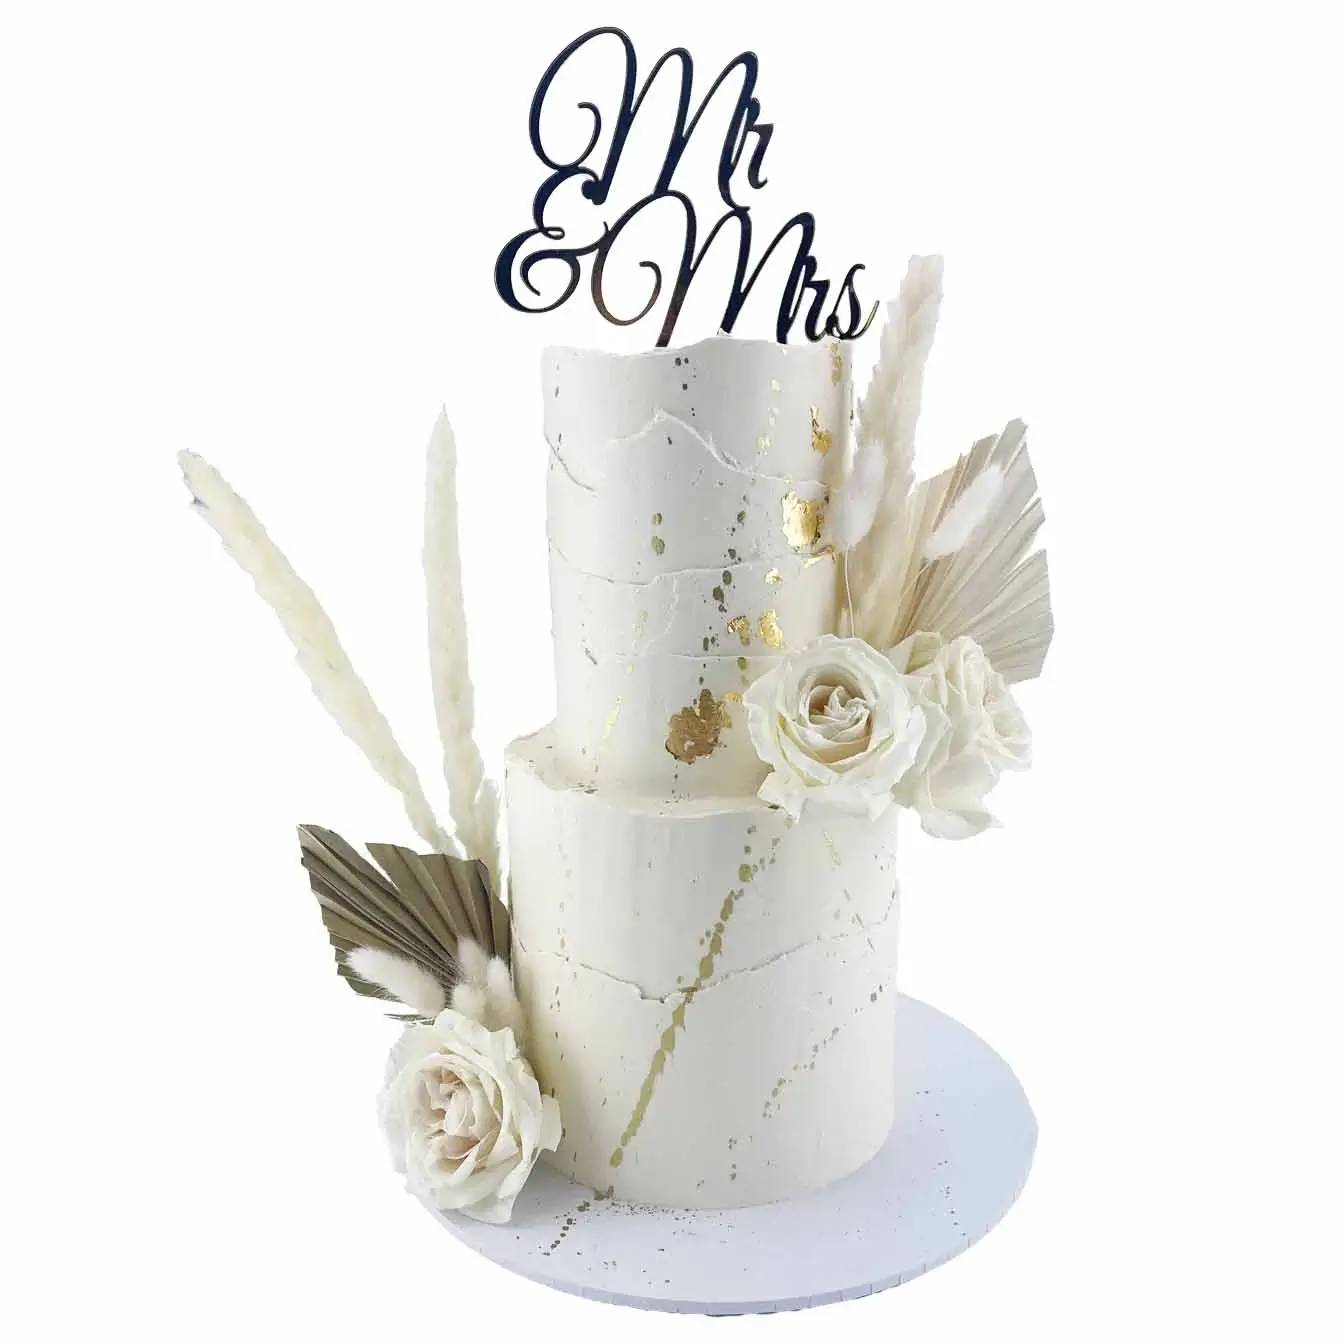 Rustic Wedding Splatter Cake - A two-tier white iced cake with gold splatter, adorned with a mix of fresh and dried flowers, and featuring a 'Mr and Mrs' topper, a stunning centerpiece for your special day.